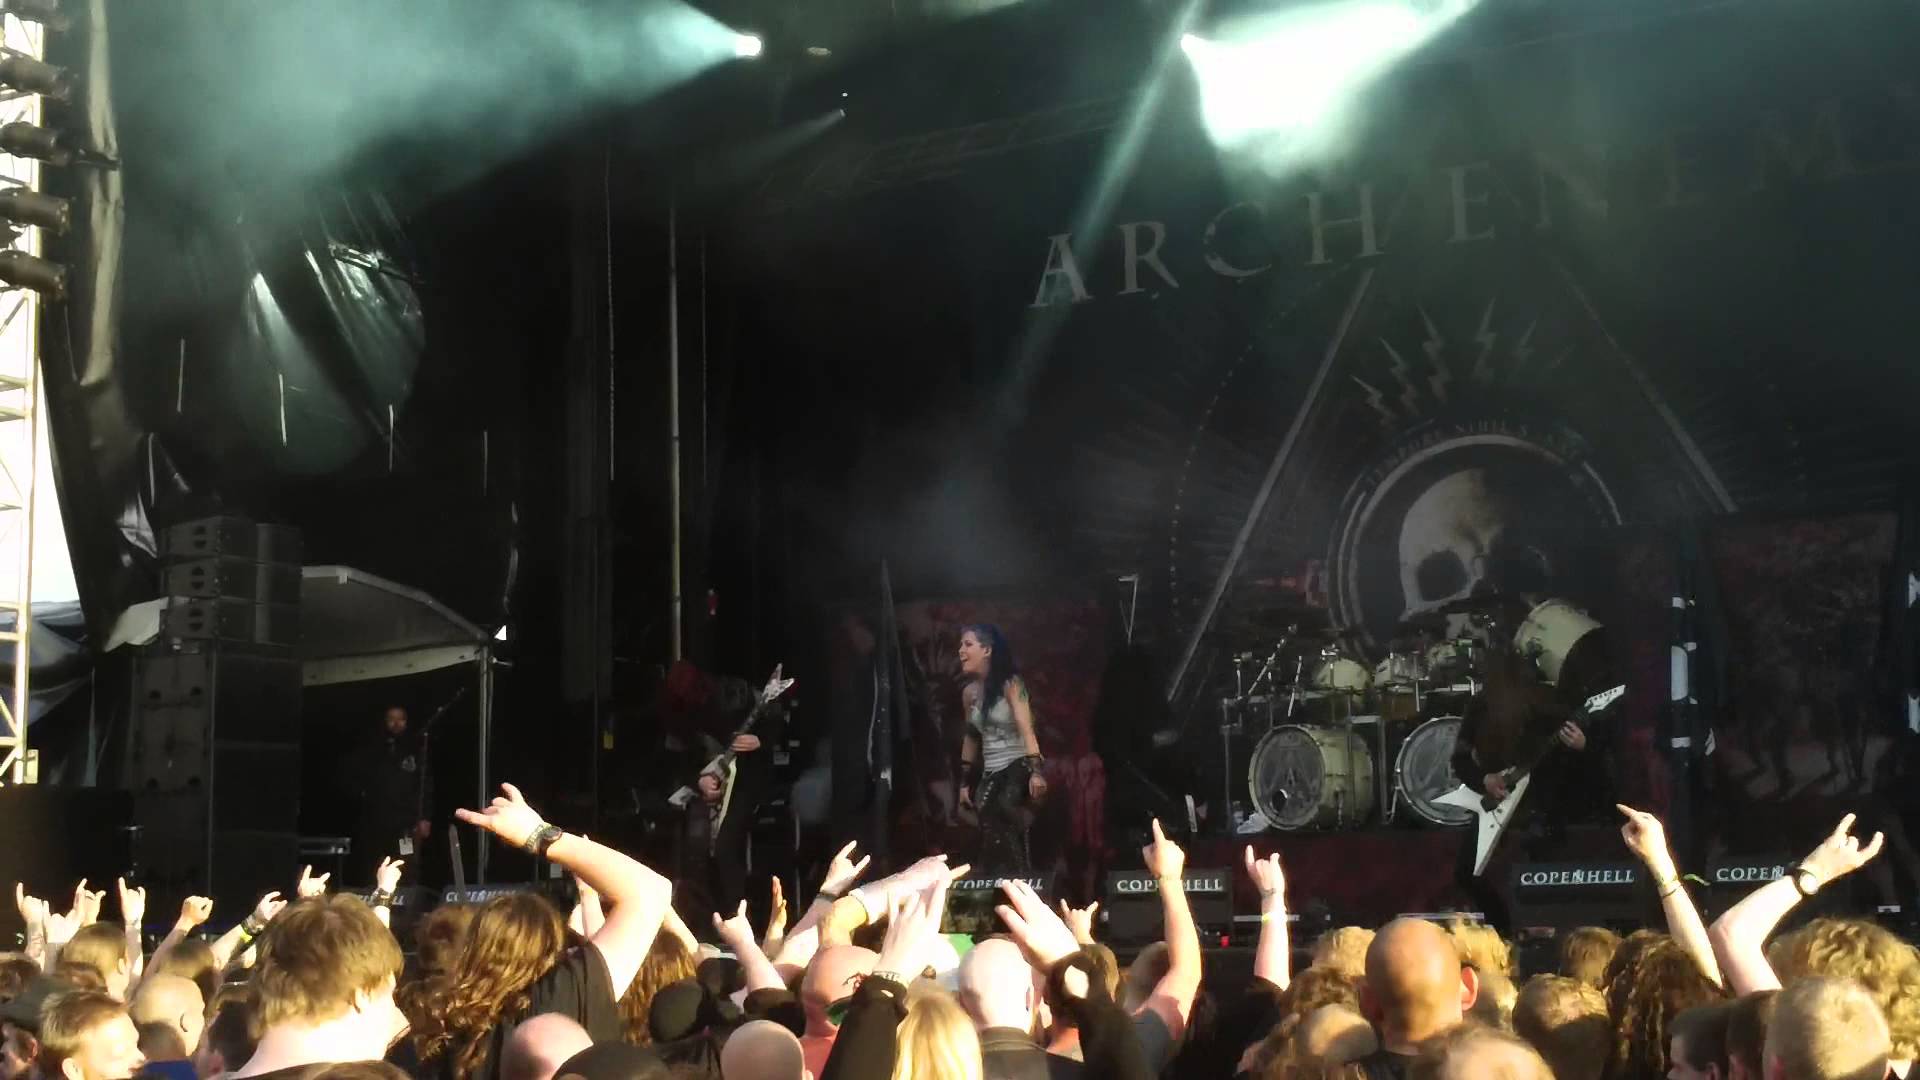 Arch Enemy - "We Will Rise" live at Copenhell 2014